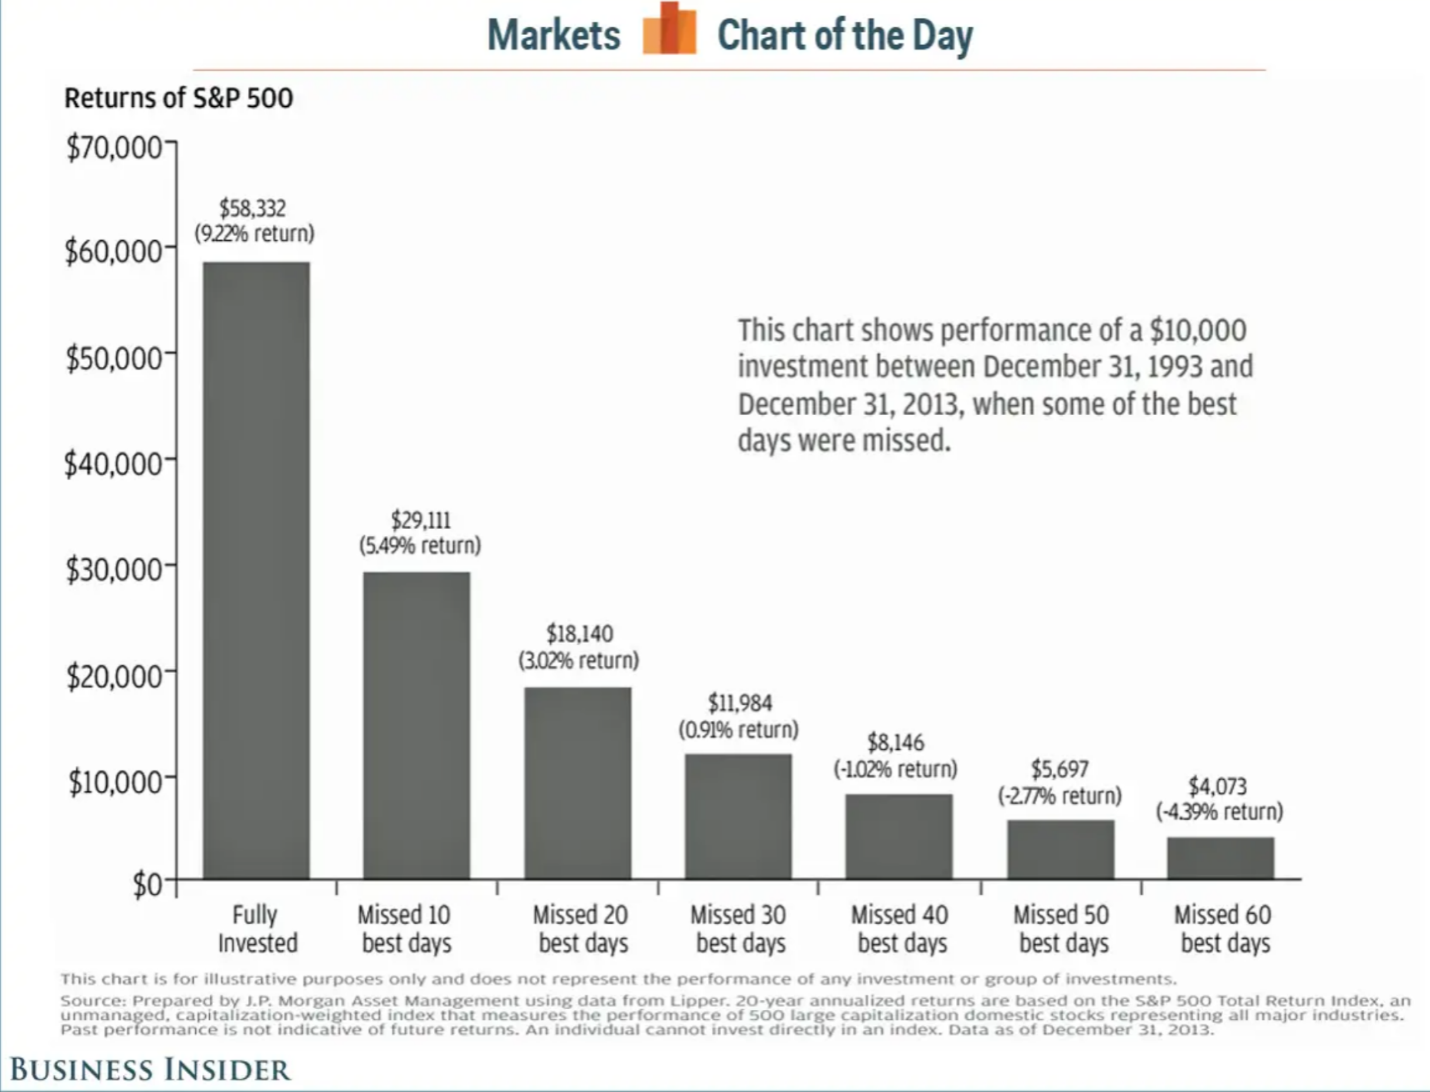 A bar graph showing the impact on returns for missing big rally days in the stock market.